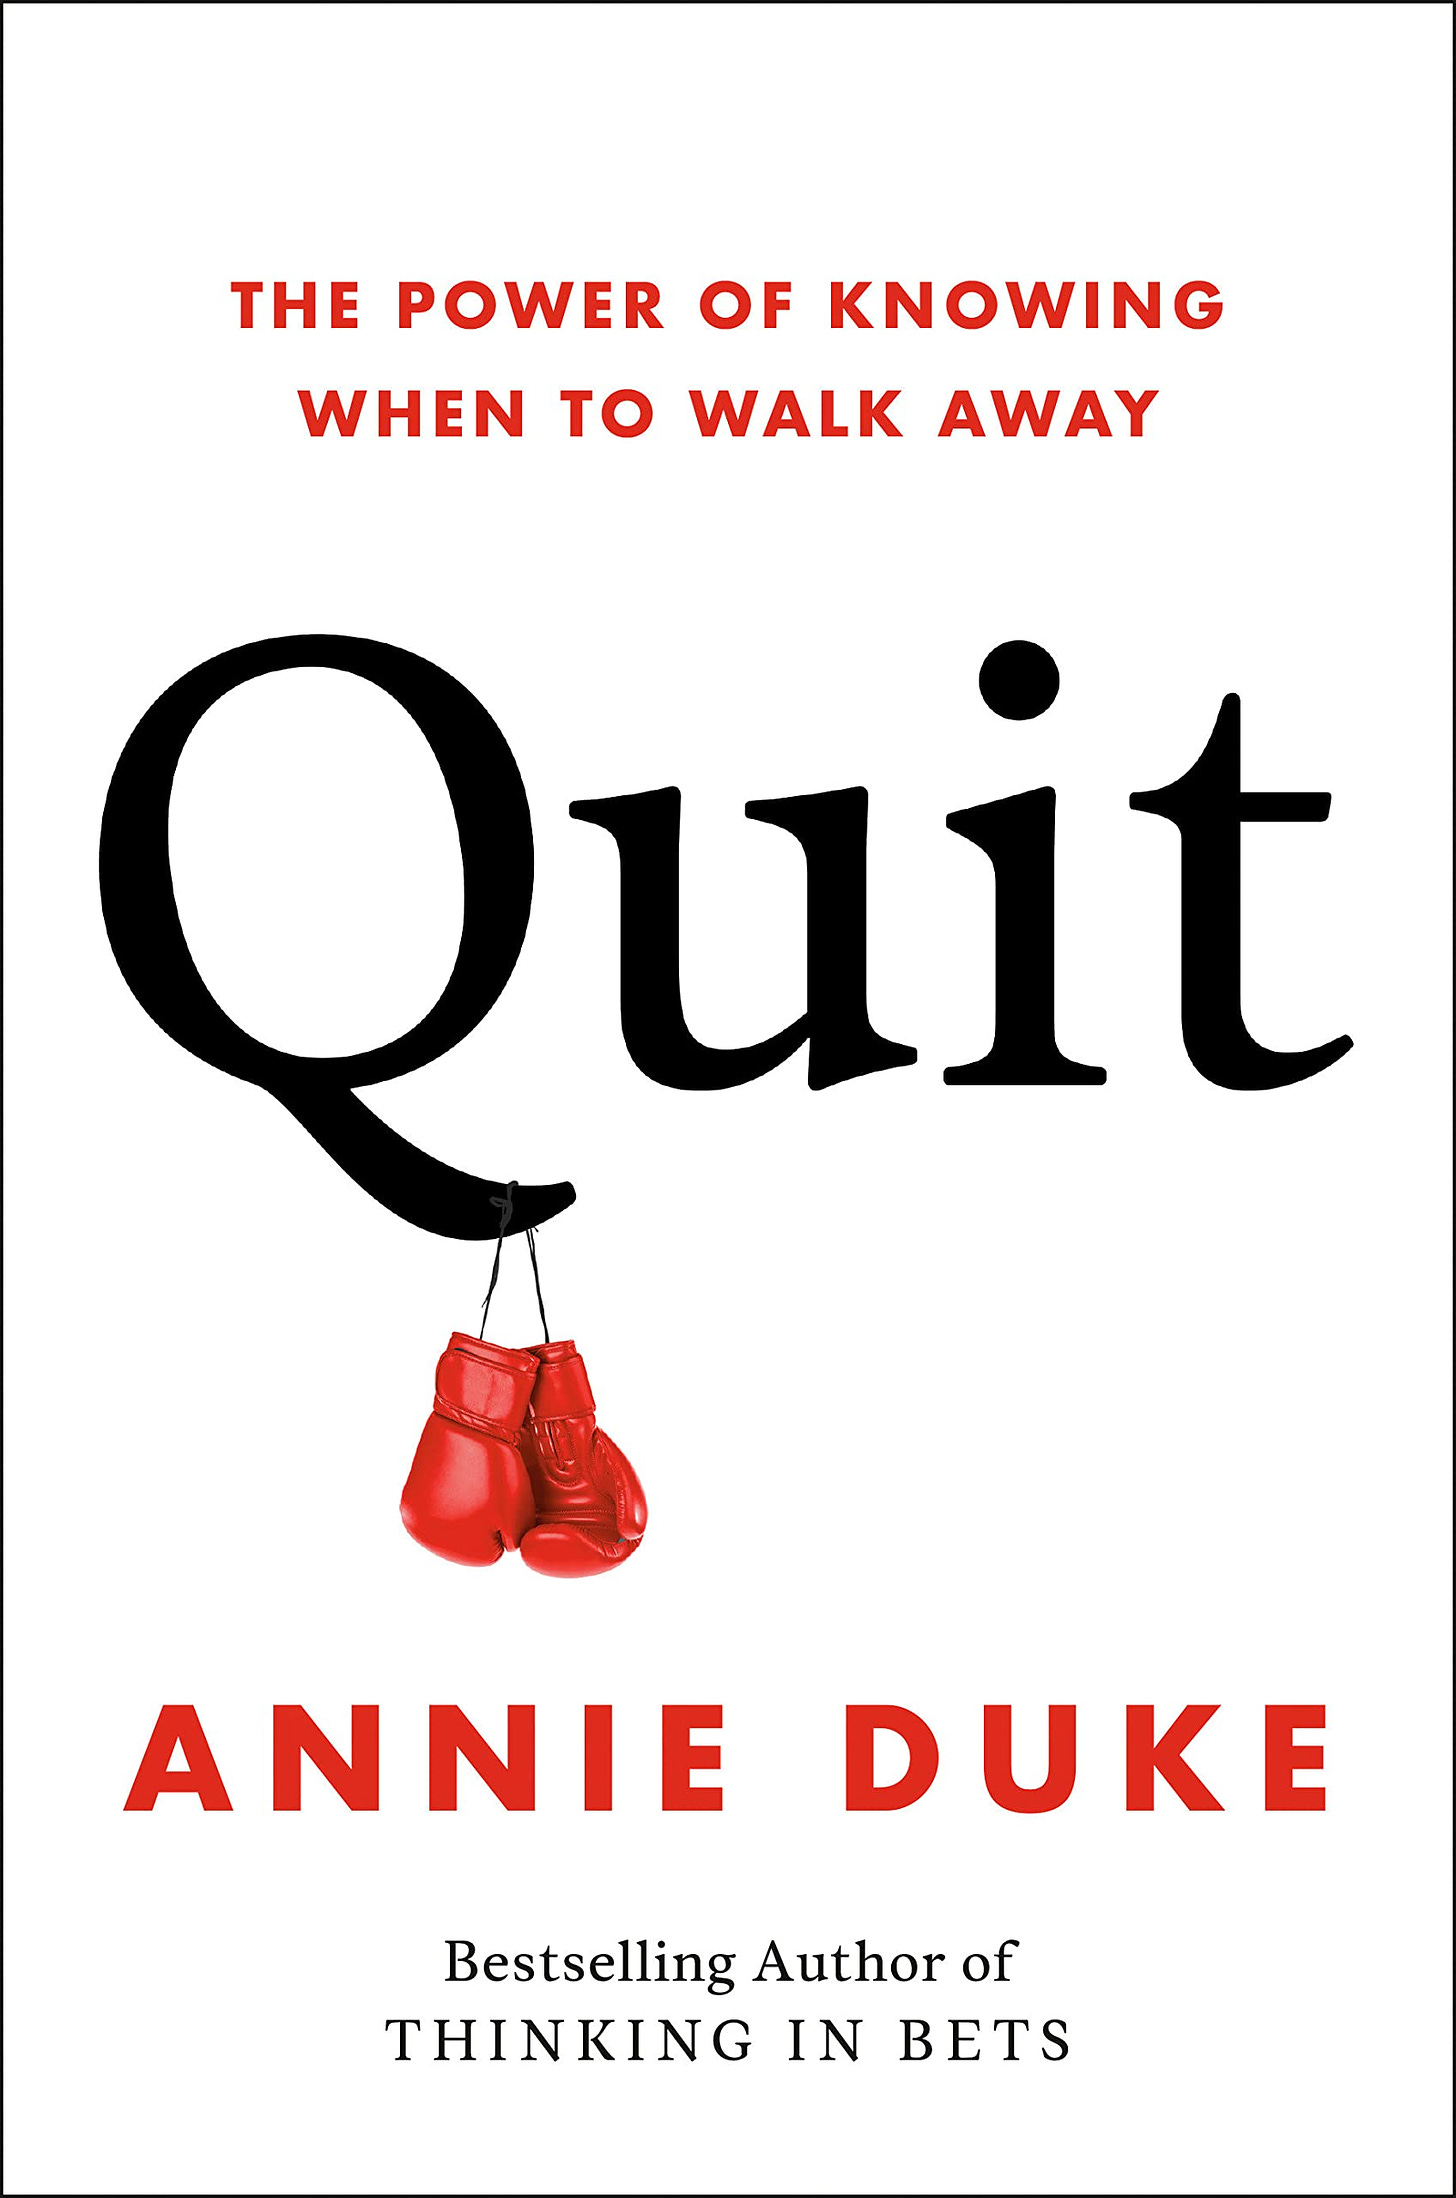 Quit: The Power of Knowing When to Walk Away by Annie Duke | Goodreads